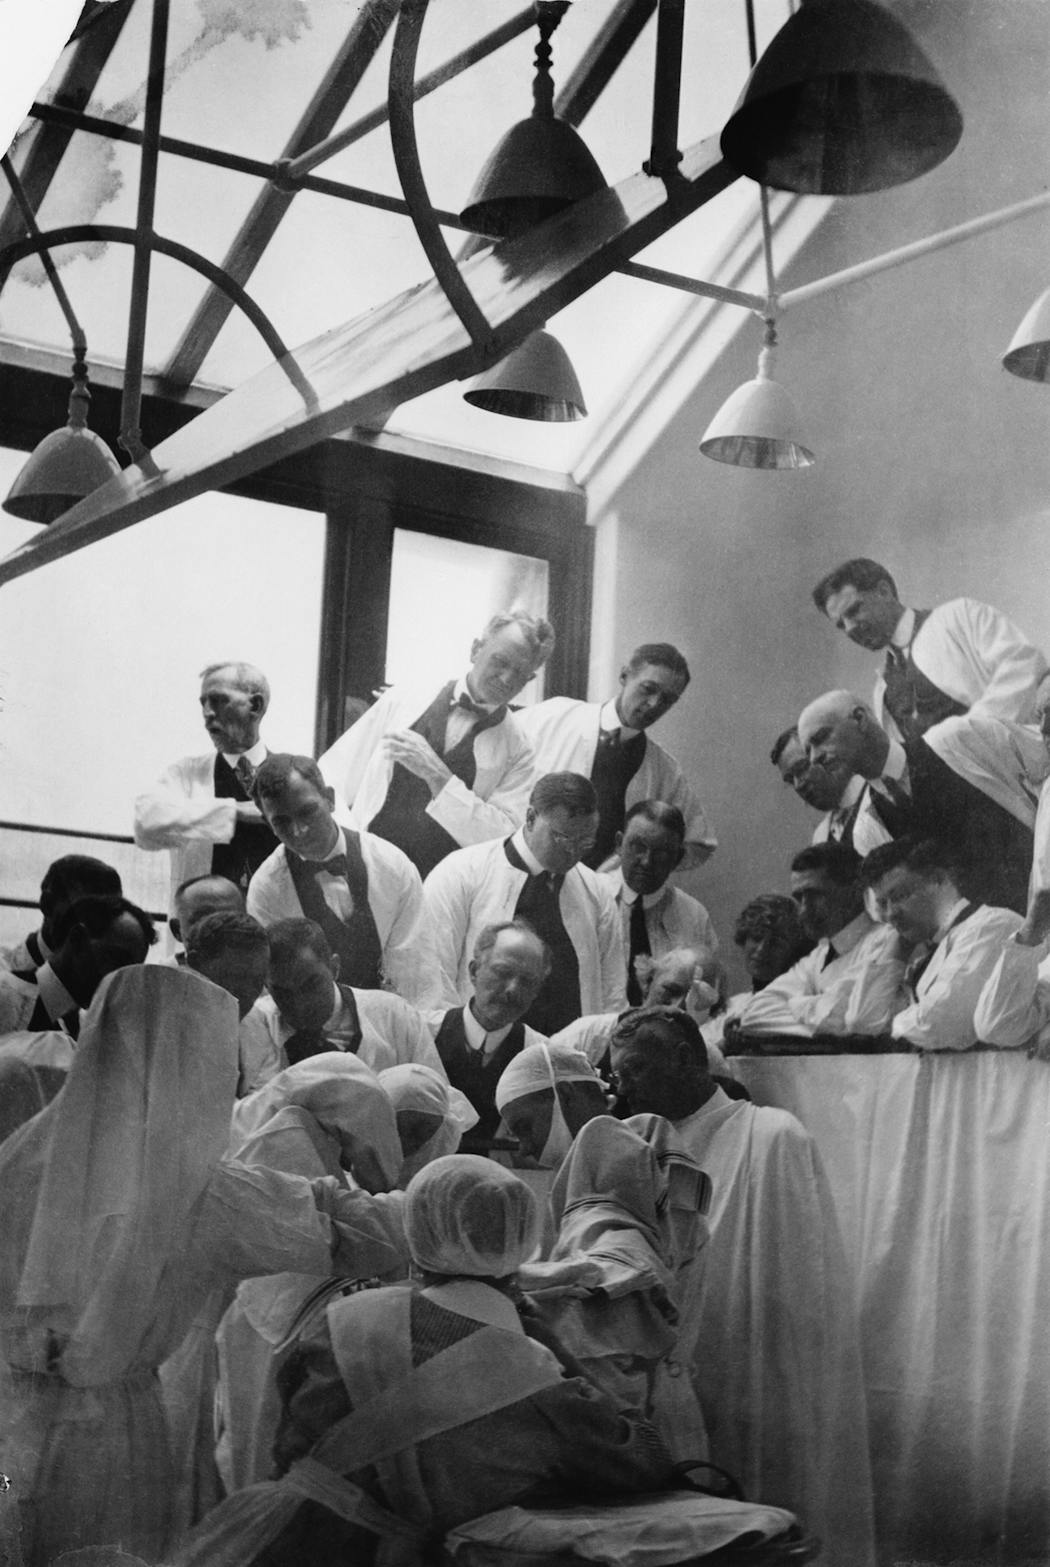 Physicians observed an operation by Dr. Charles H. Mayo in 1913.